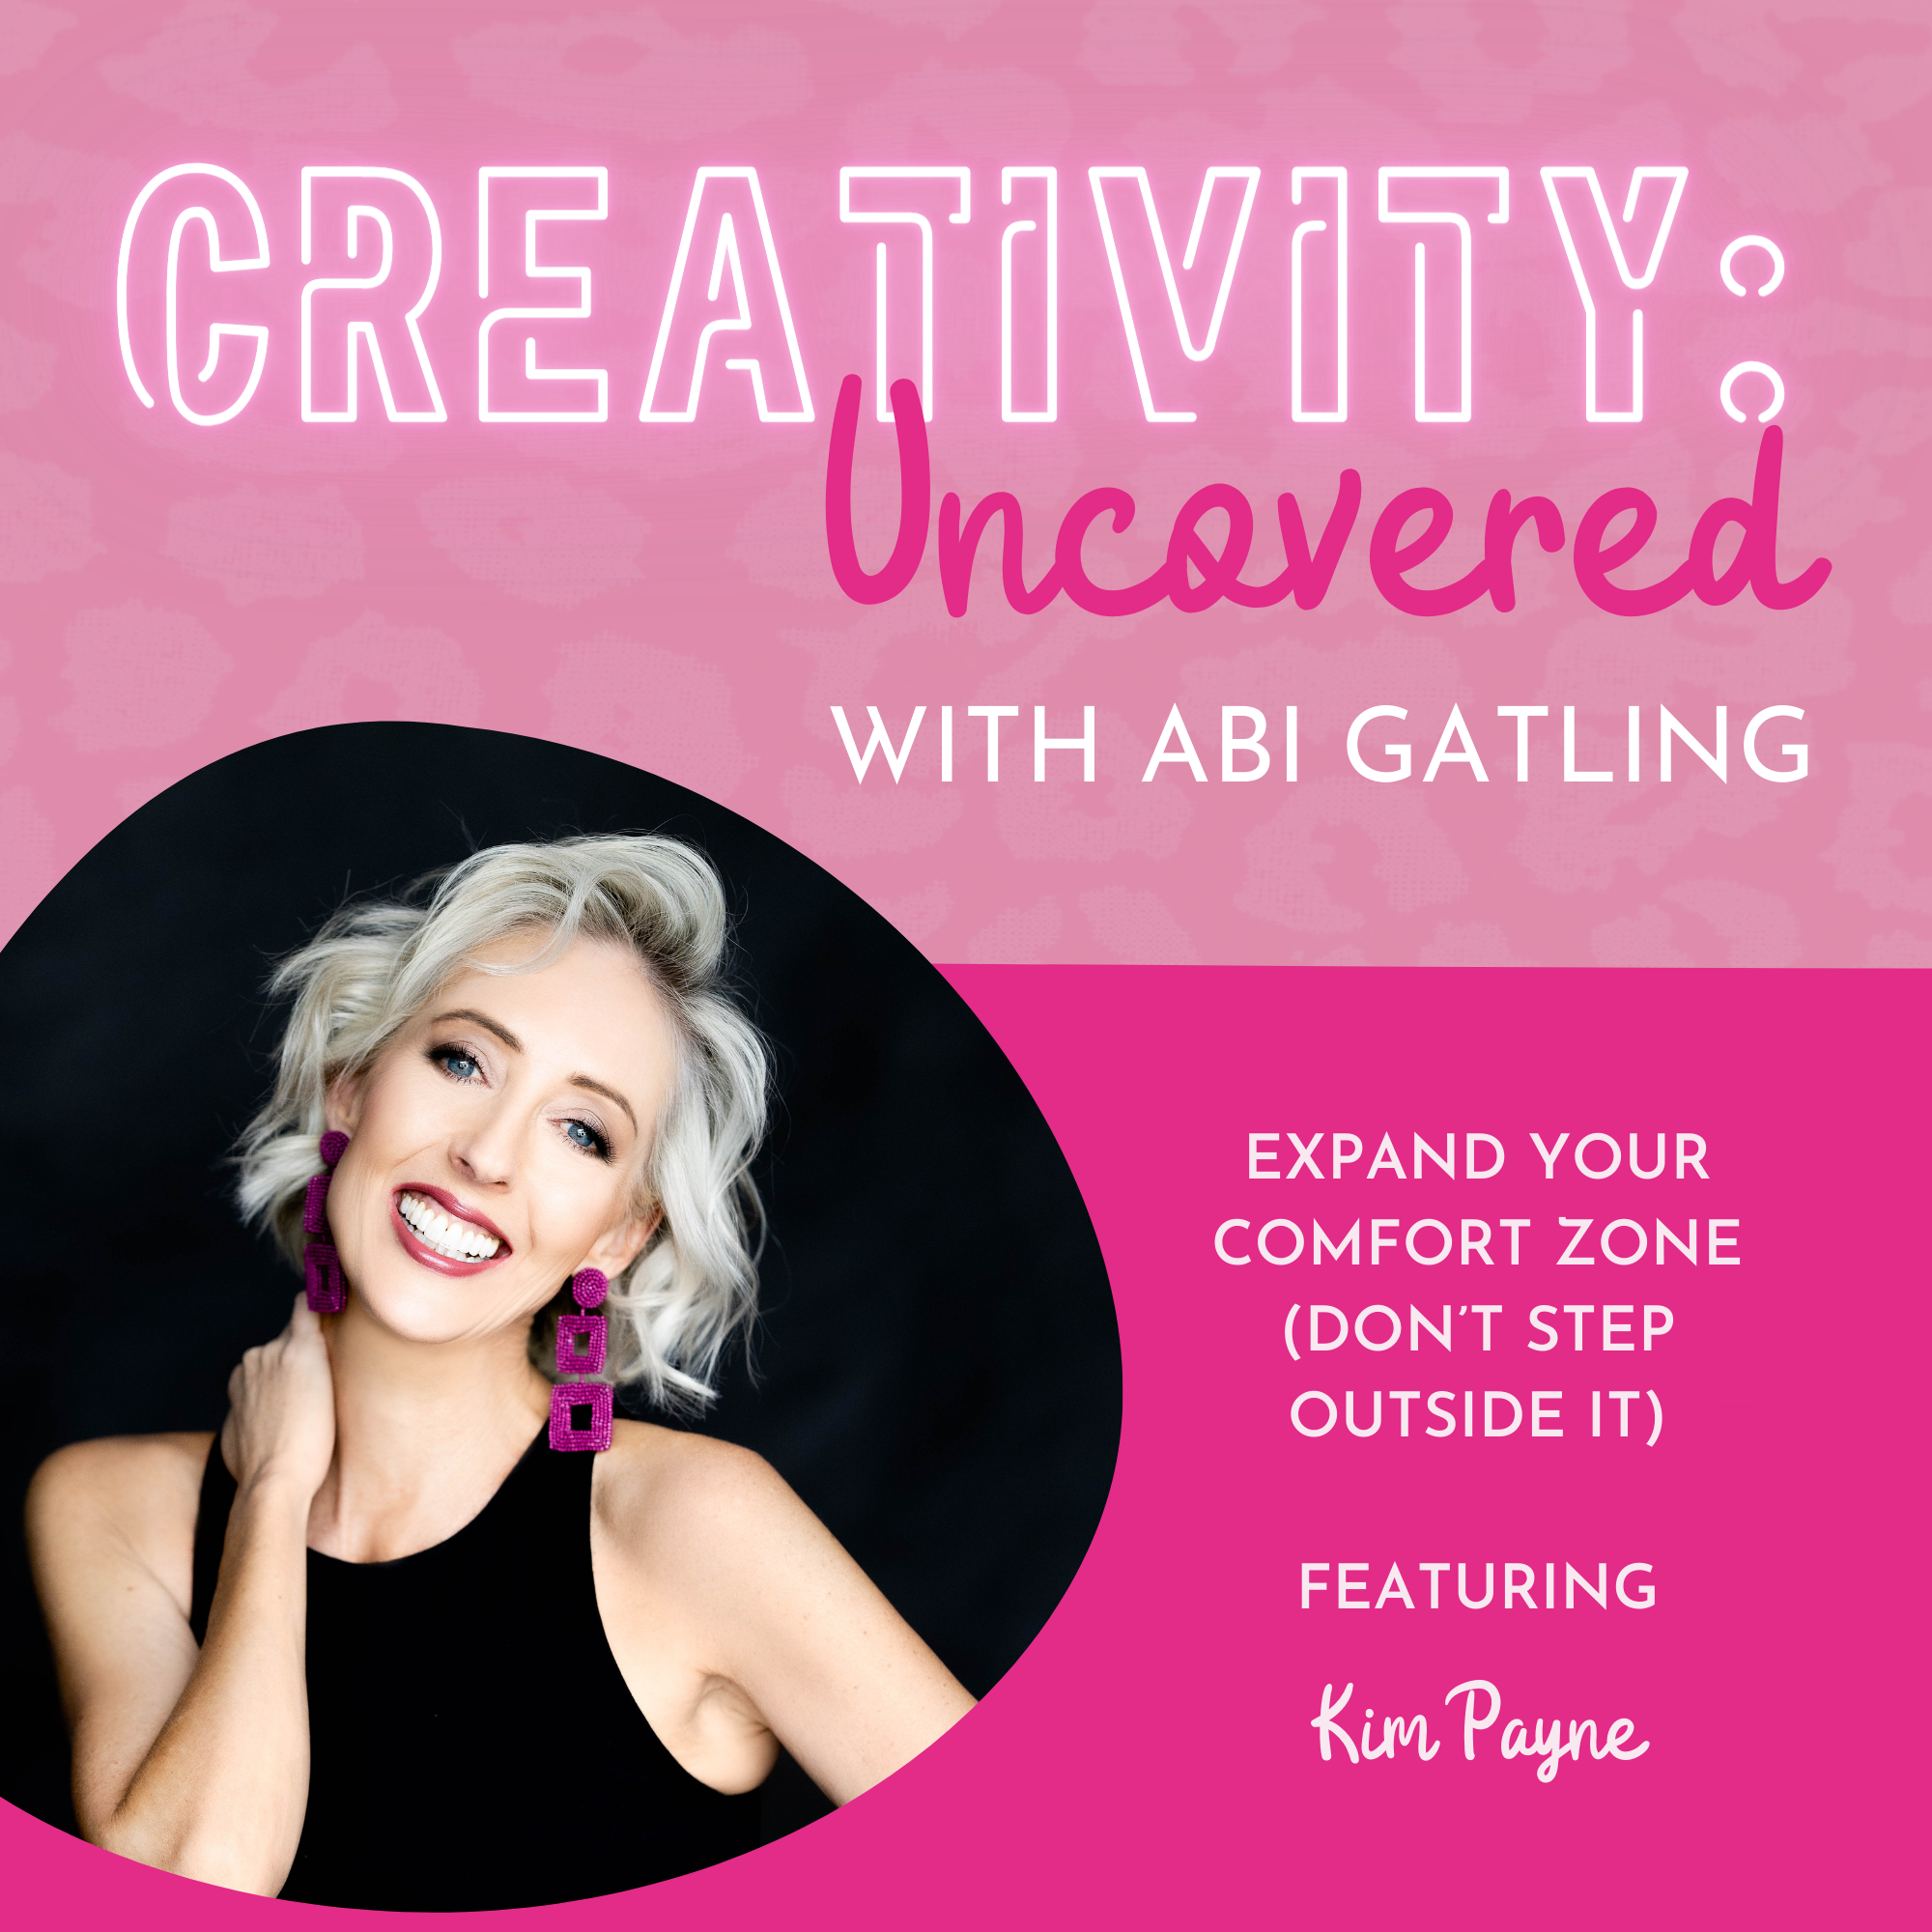 Creativity: Uncovered podcast episode graphic featuring guest Kim Payne